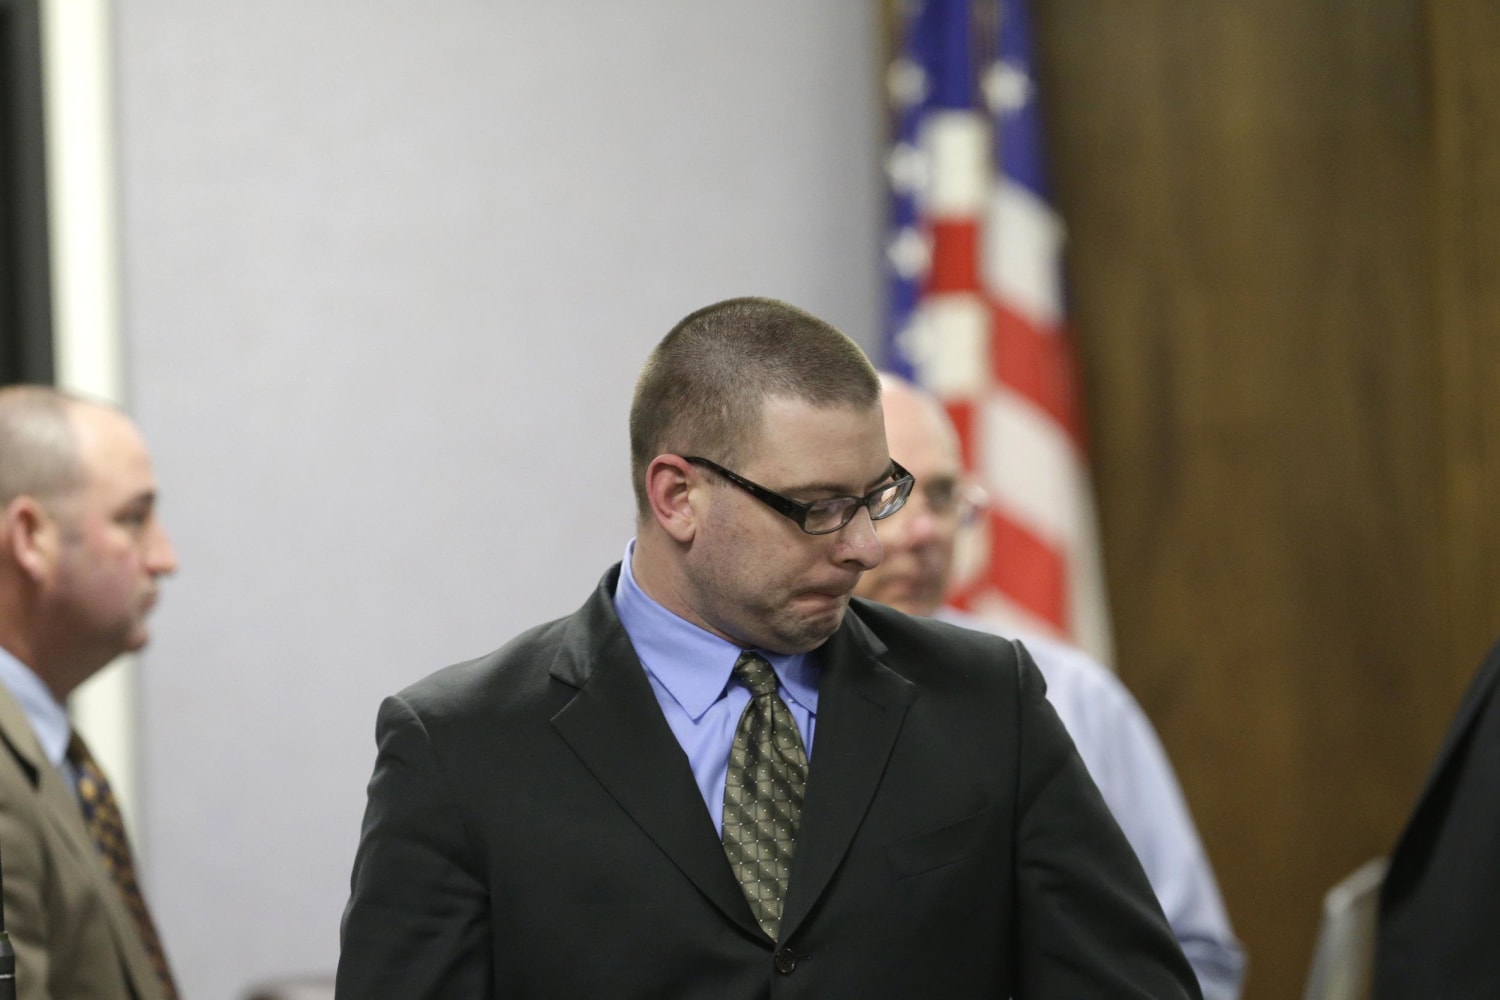 American Sniper Killer Eddie Ray Routh Wasnt Insane, Expert Says.